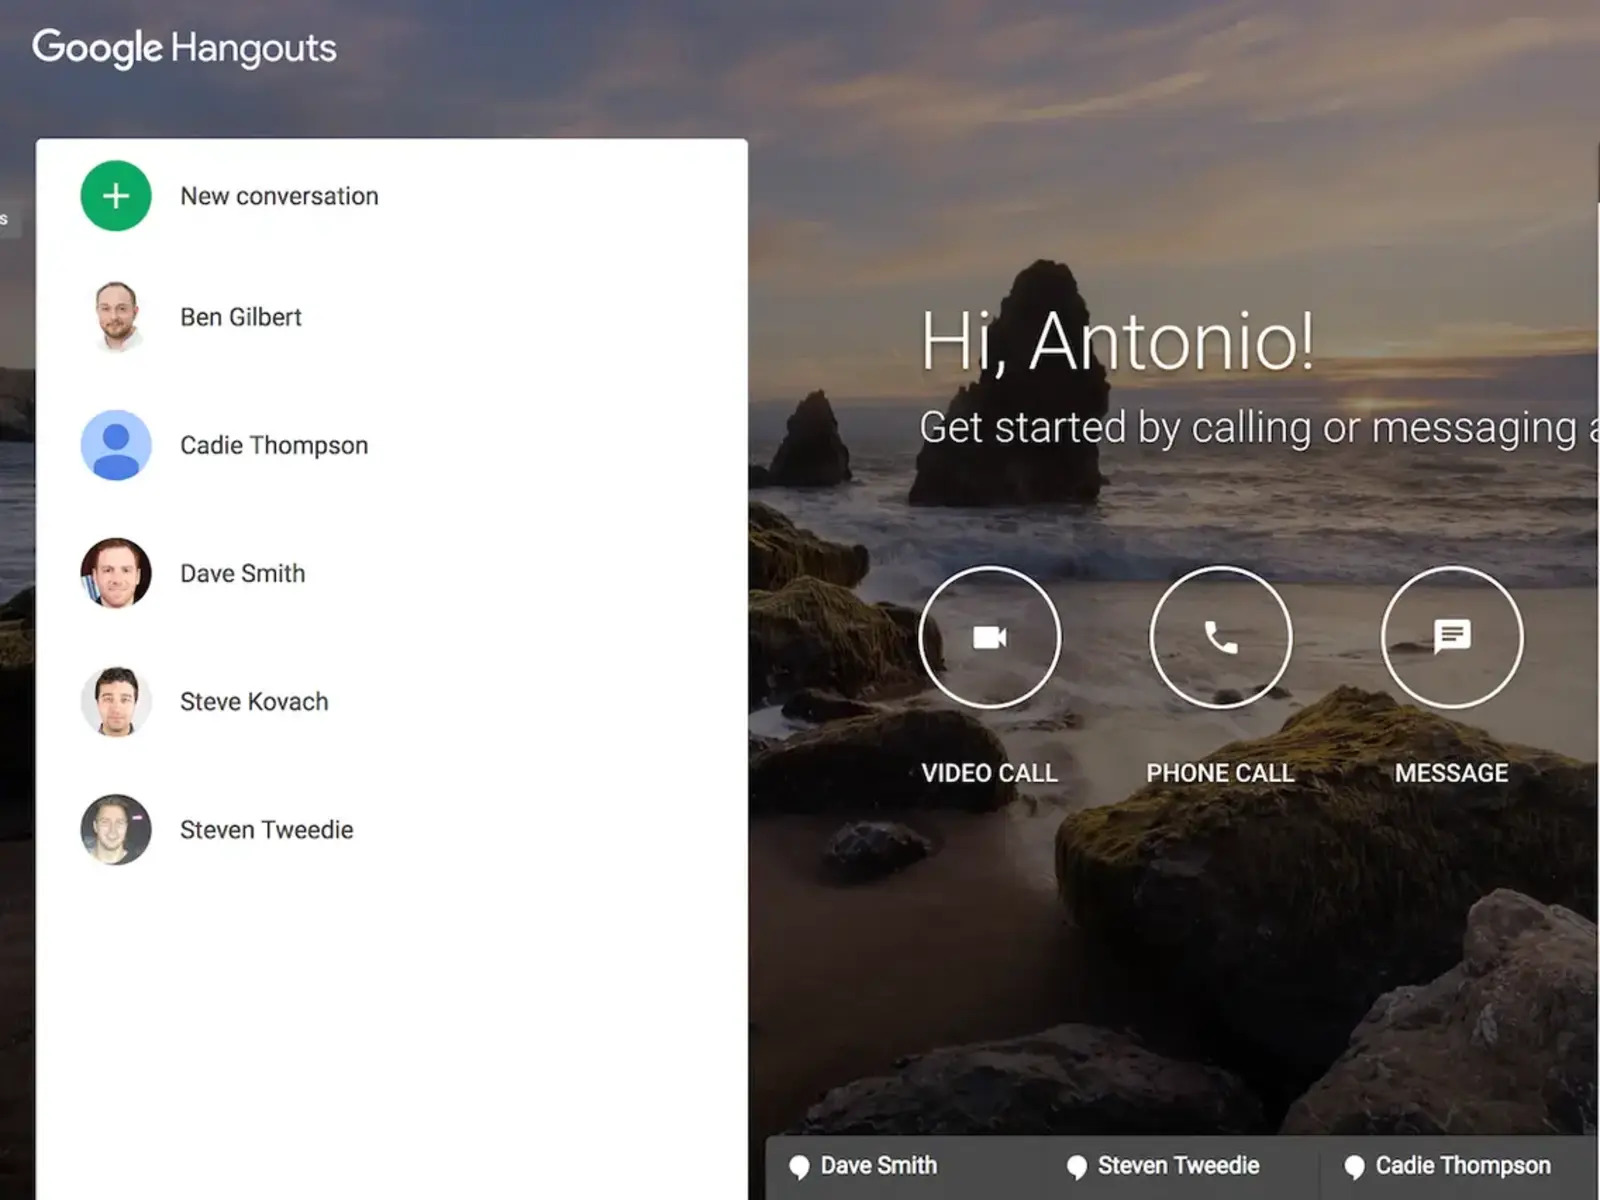 How To Set Up A Google Hangout Through Your Web Browser